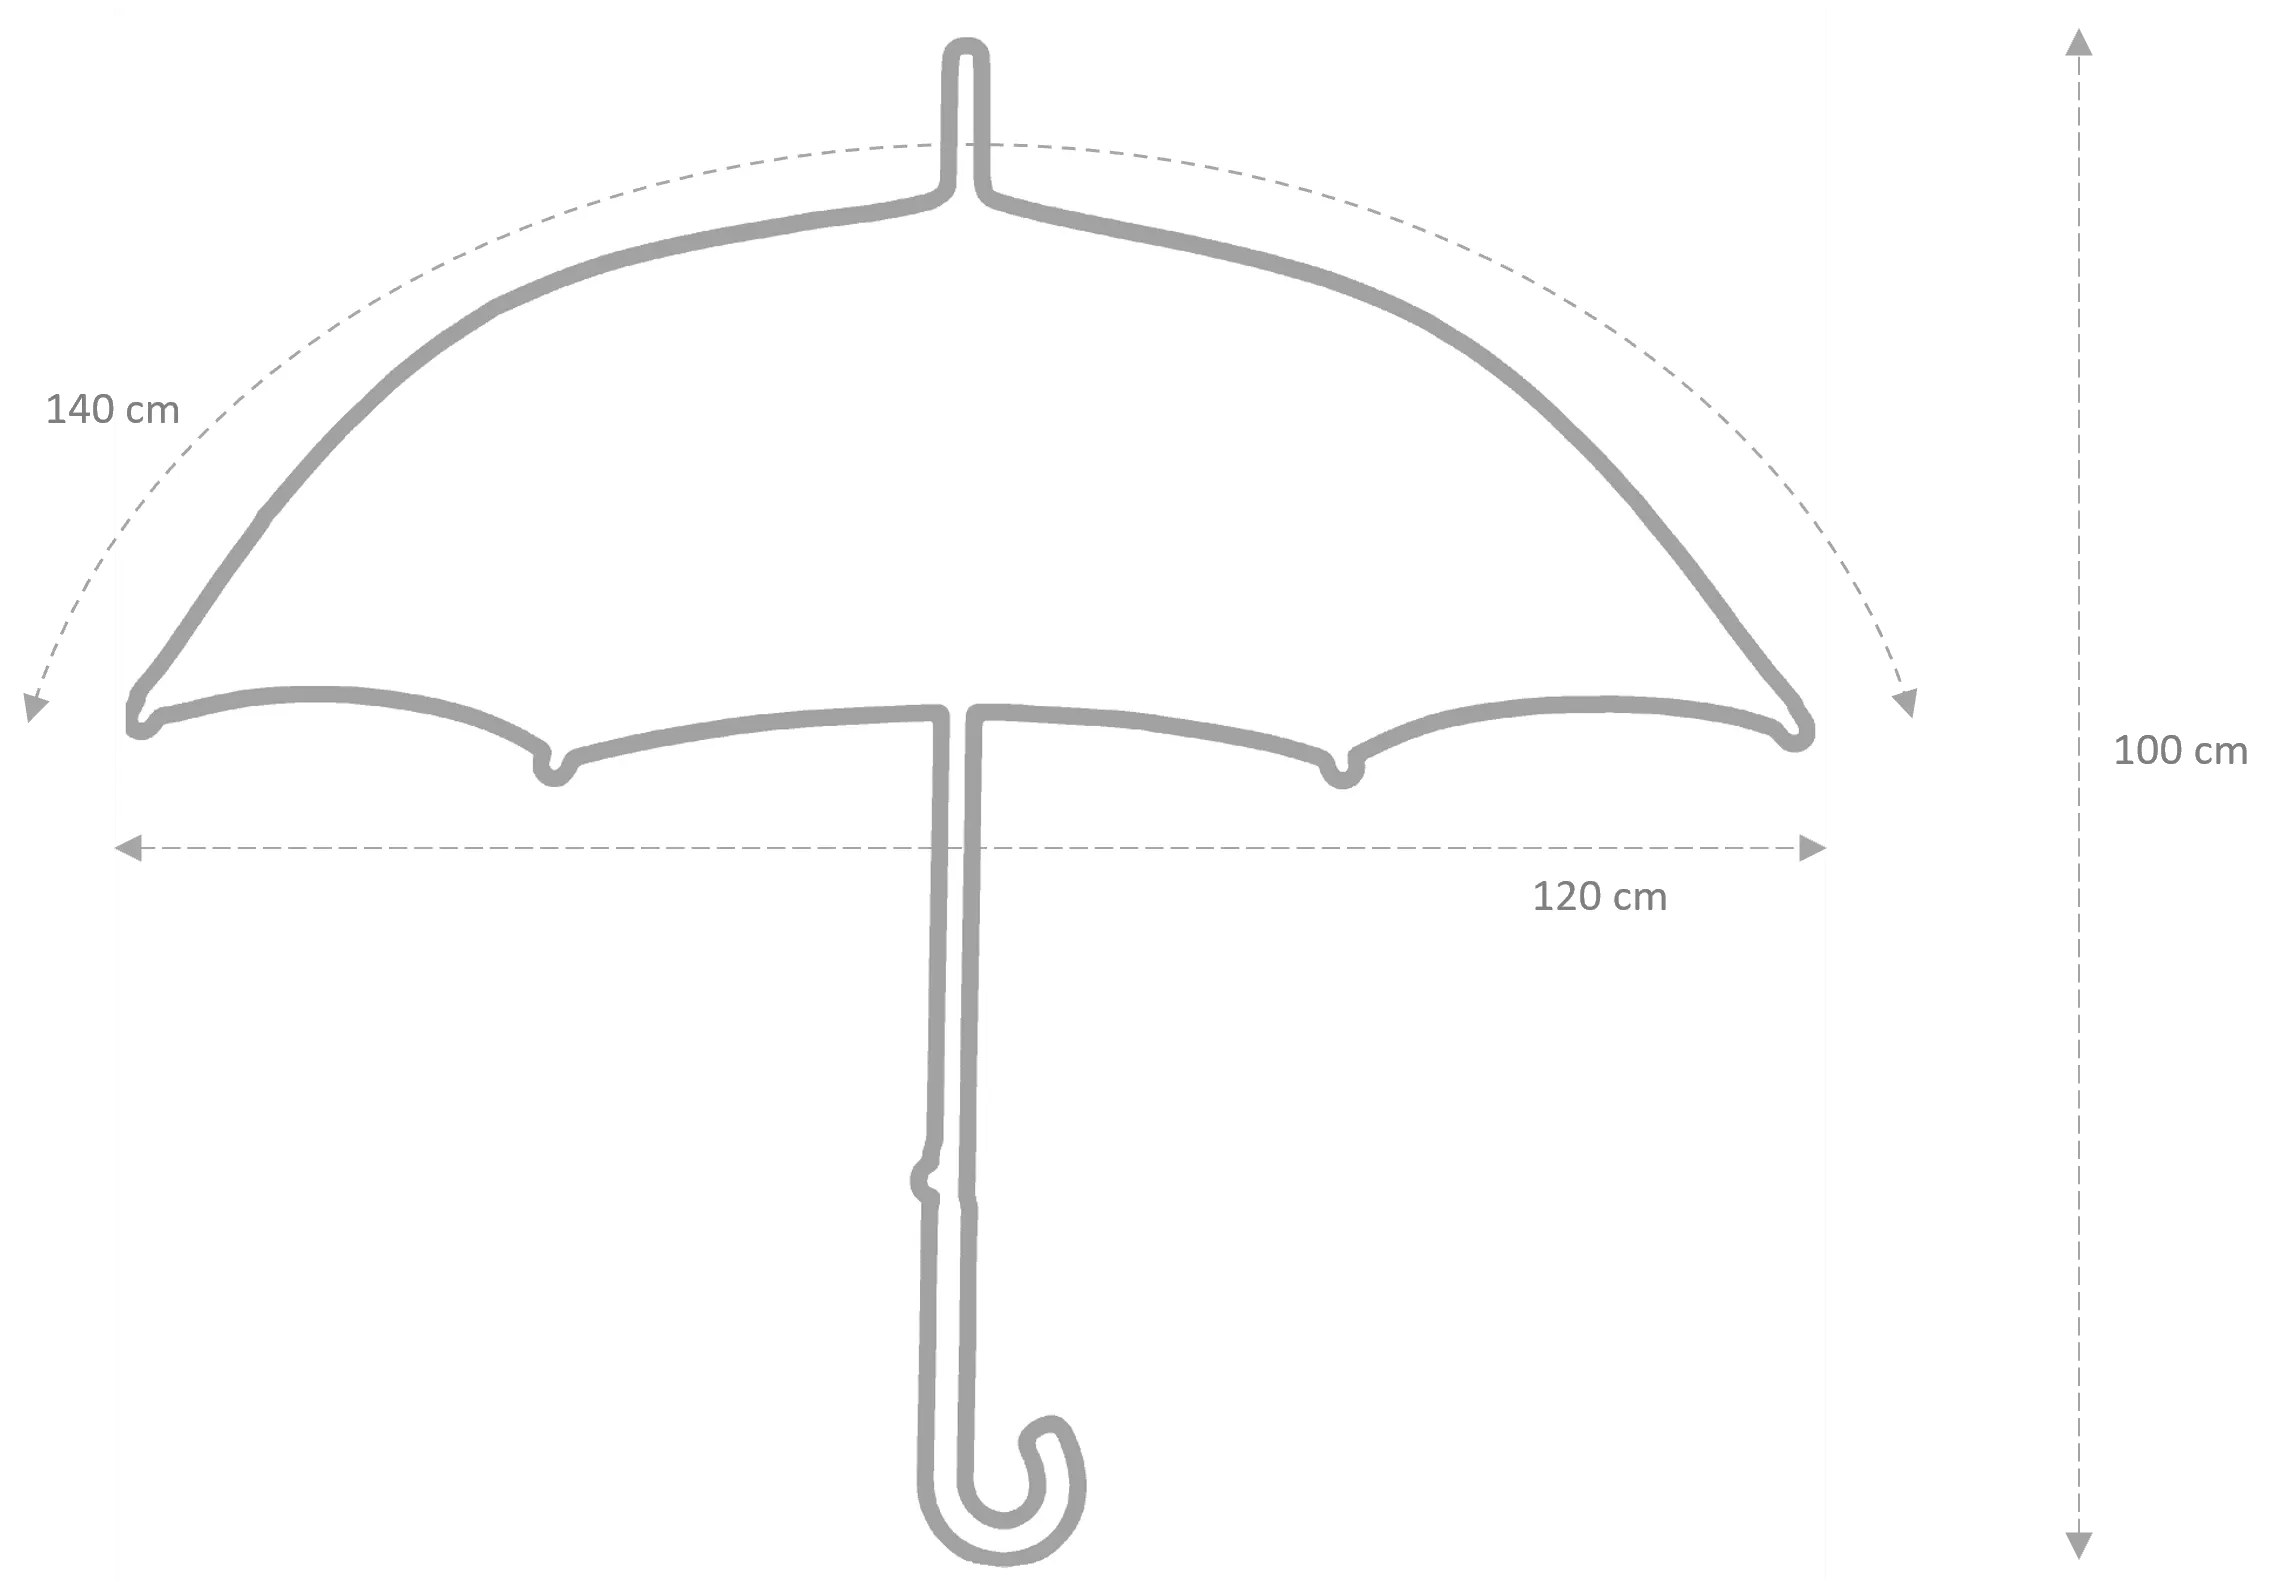 hidewise-london-umbrella-wooden-J-handle-strong-premium-quality-brolly-green-gust-proof-straight-golf-size-professional-elegant-sturdy-wind-proof-canopy-size